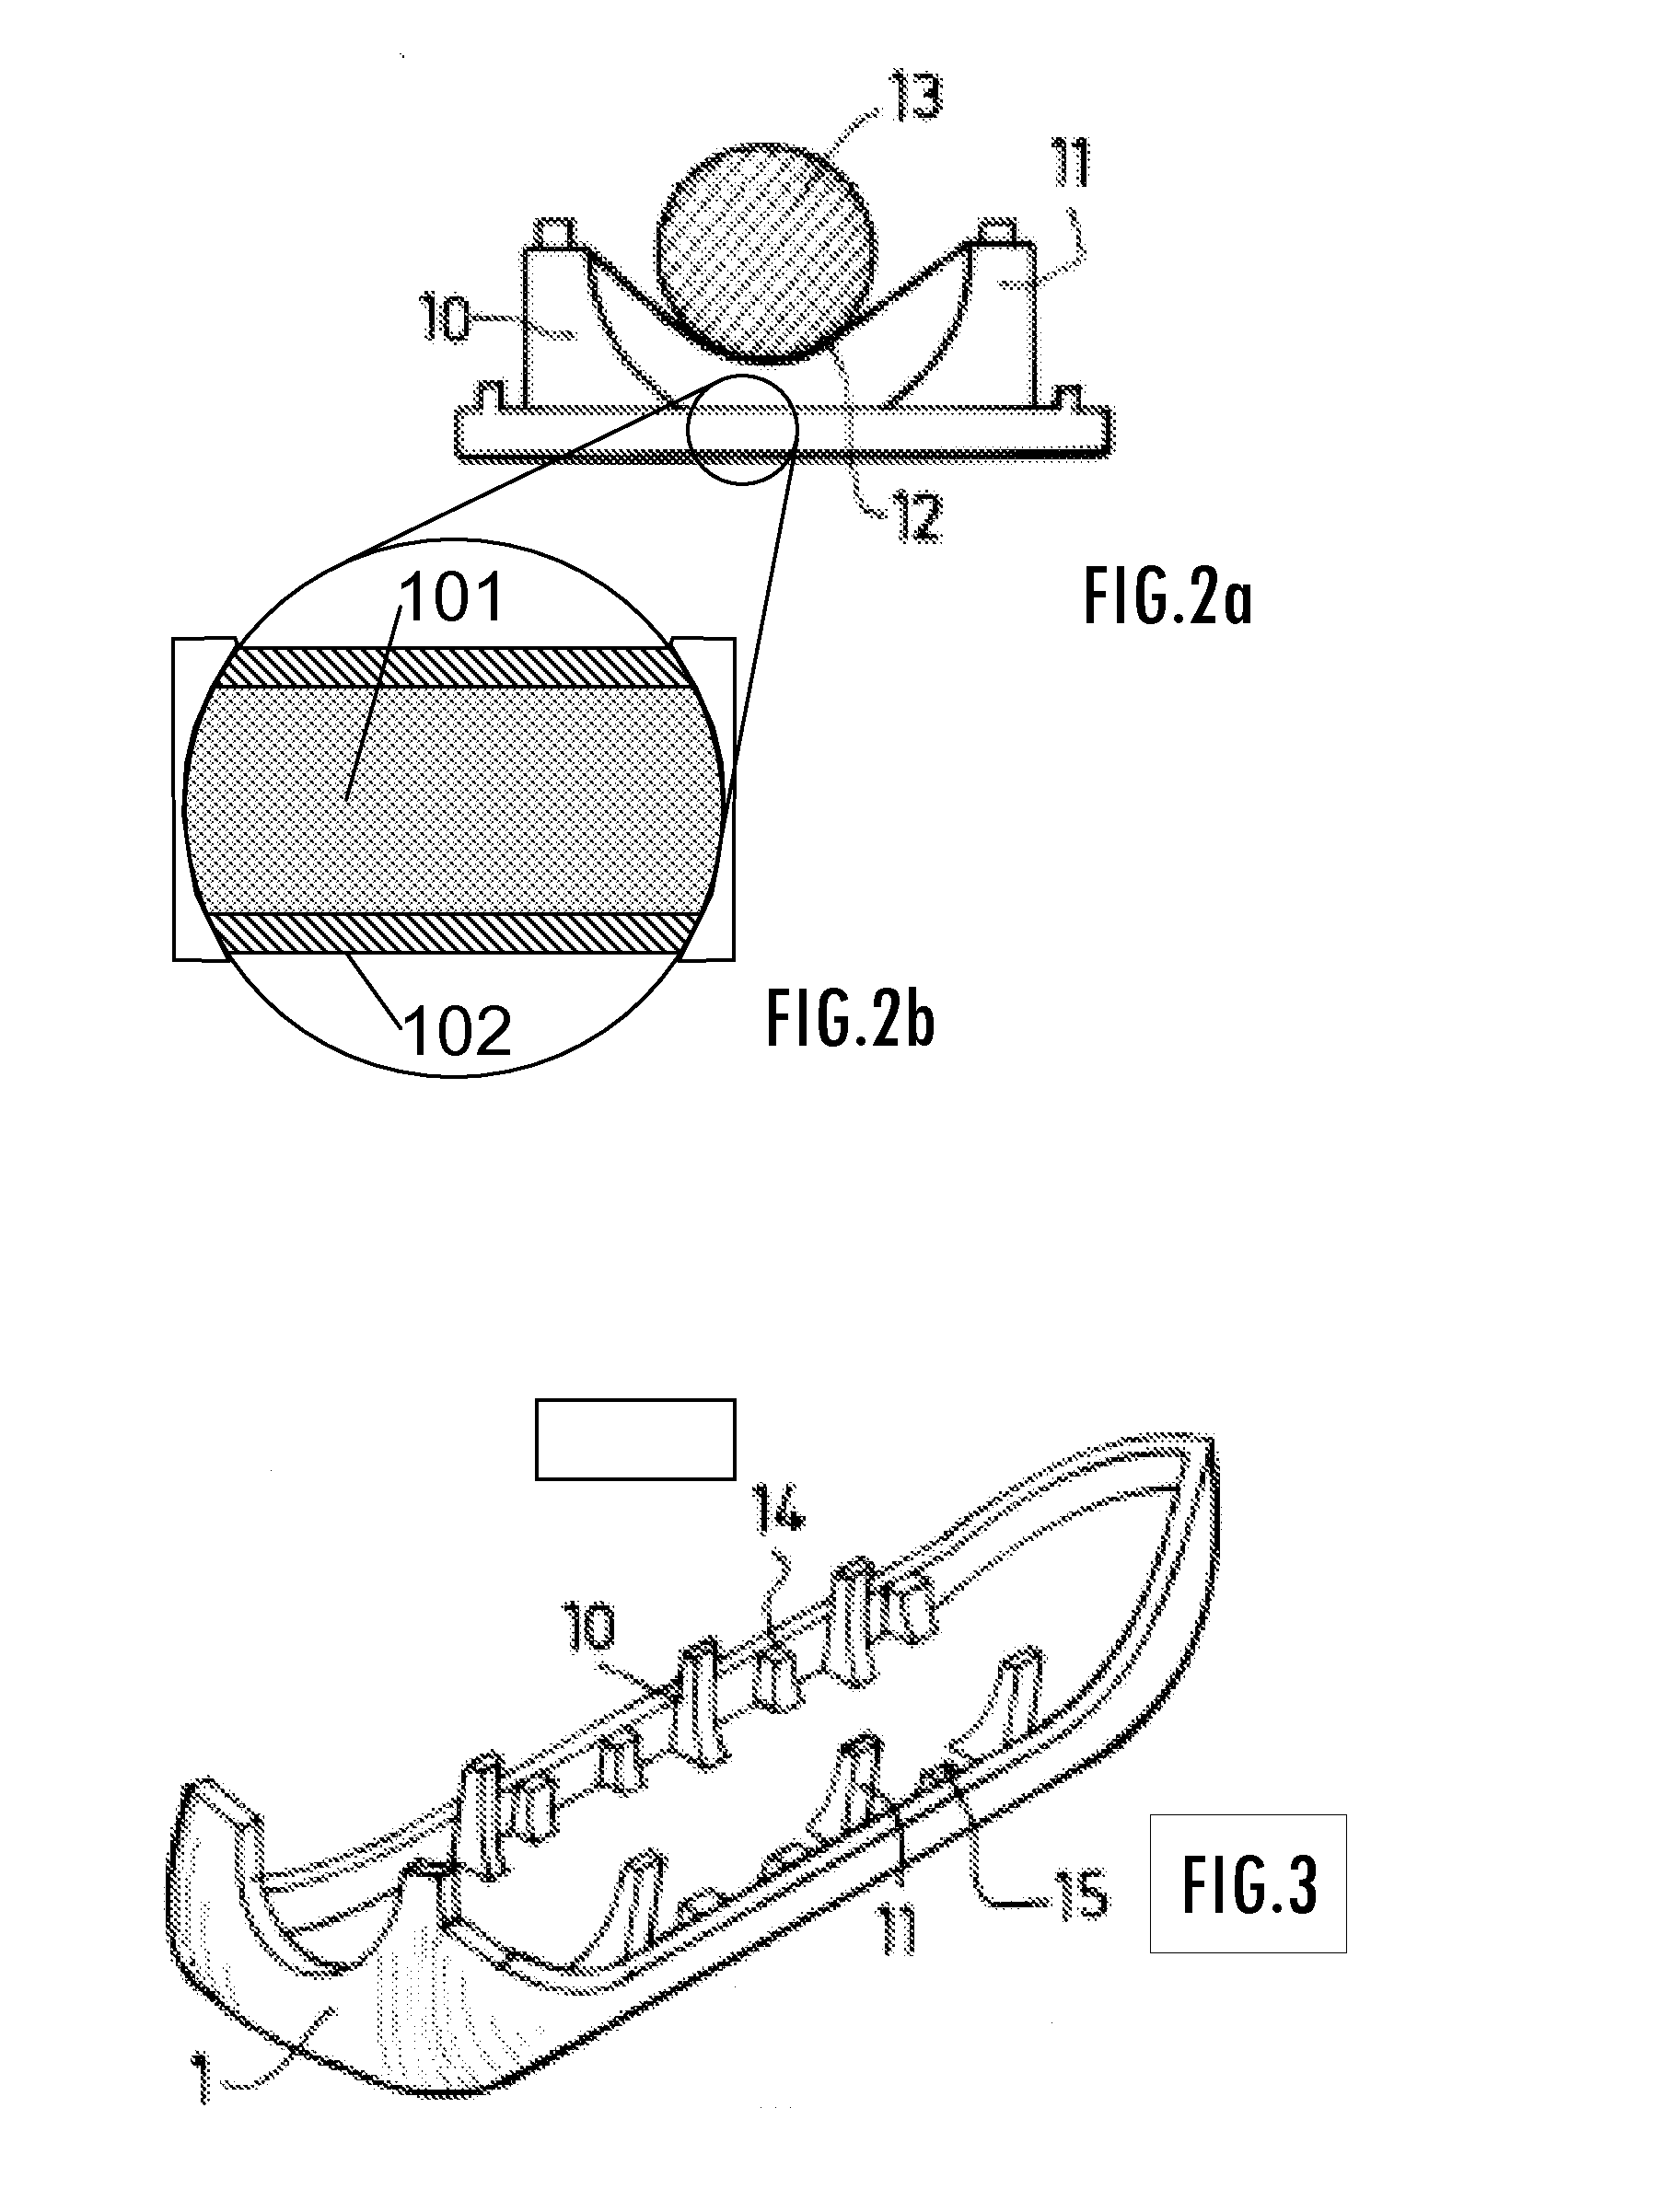 Apparatus for Body Treatment Consisting of a Shell Made of at Least Two Complementary Portions